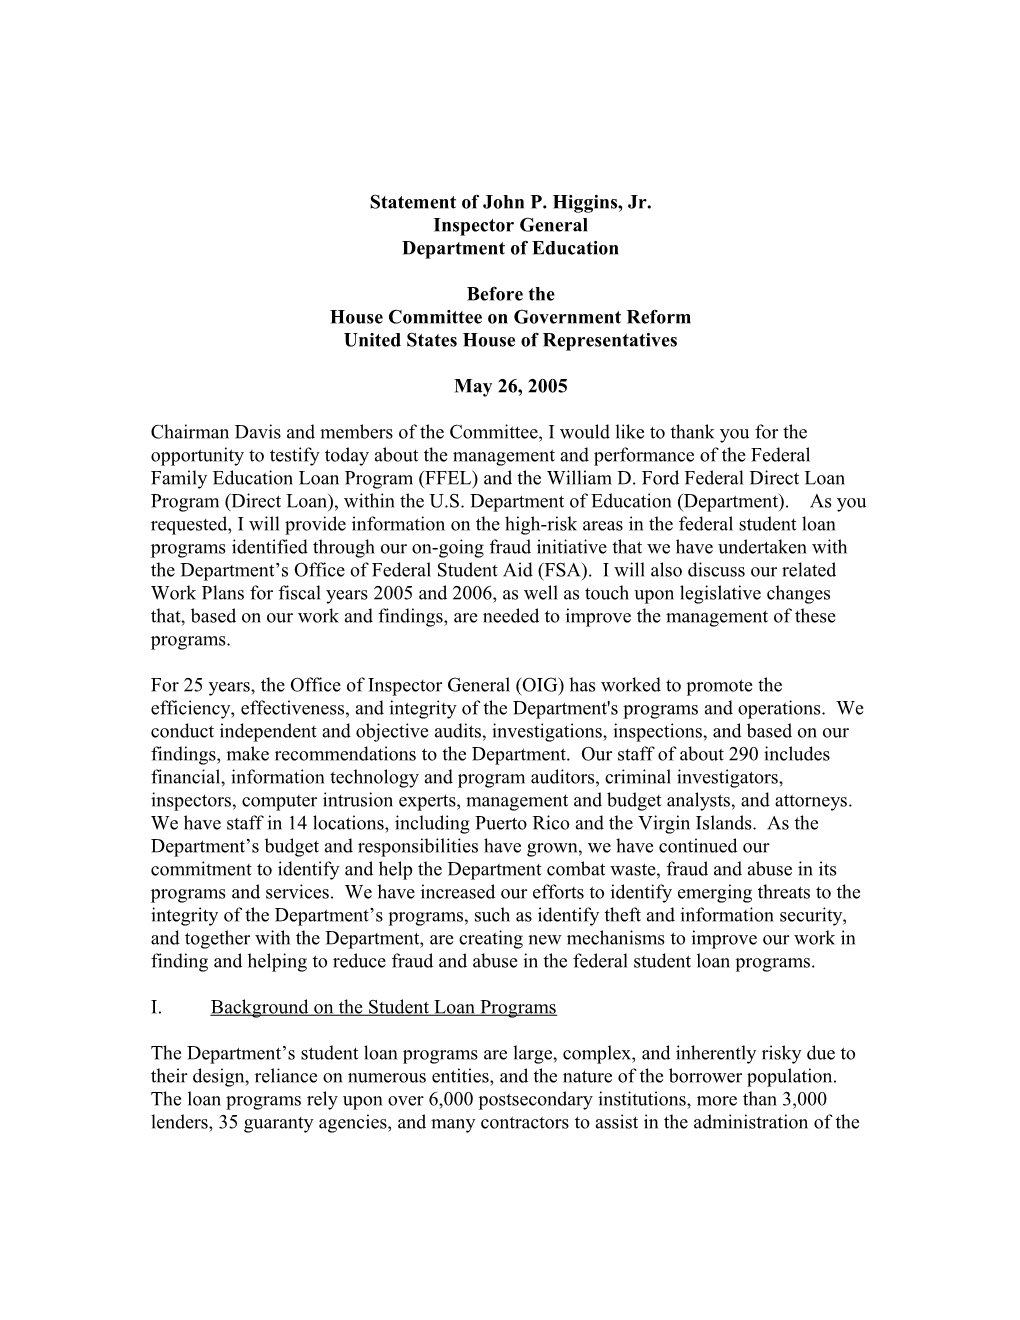 Statement of John P, Inspector General on 5/26/2005